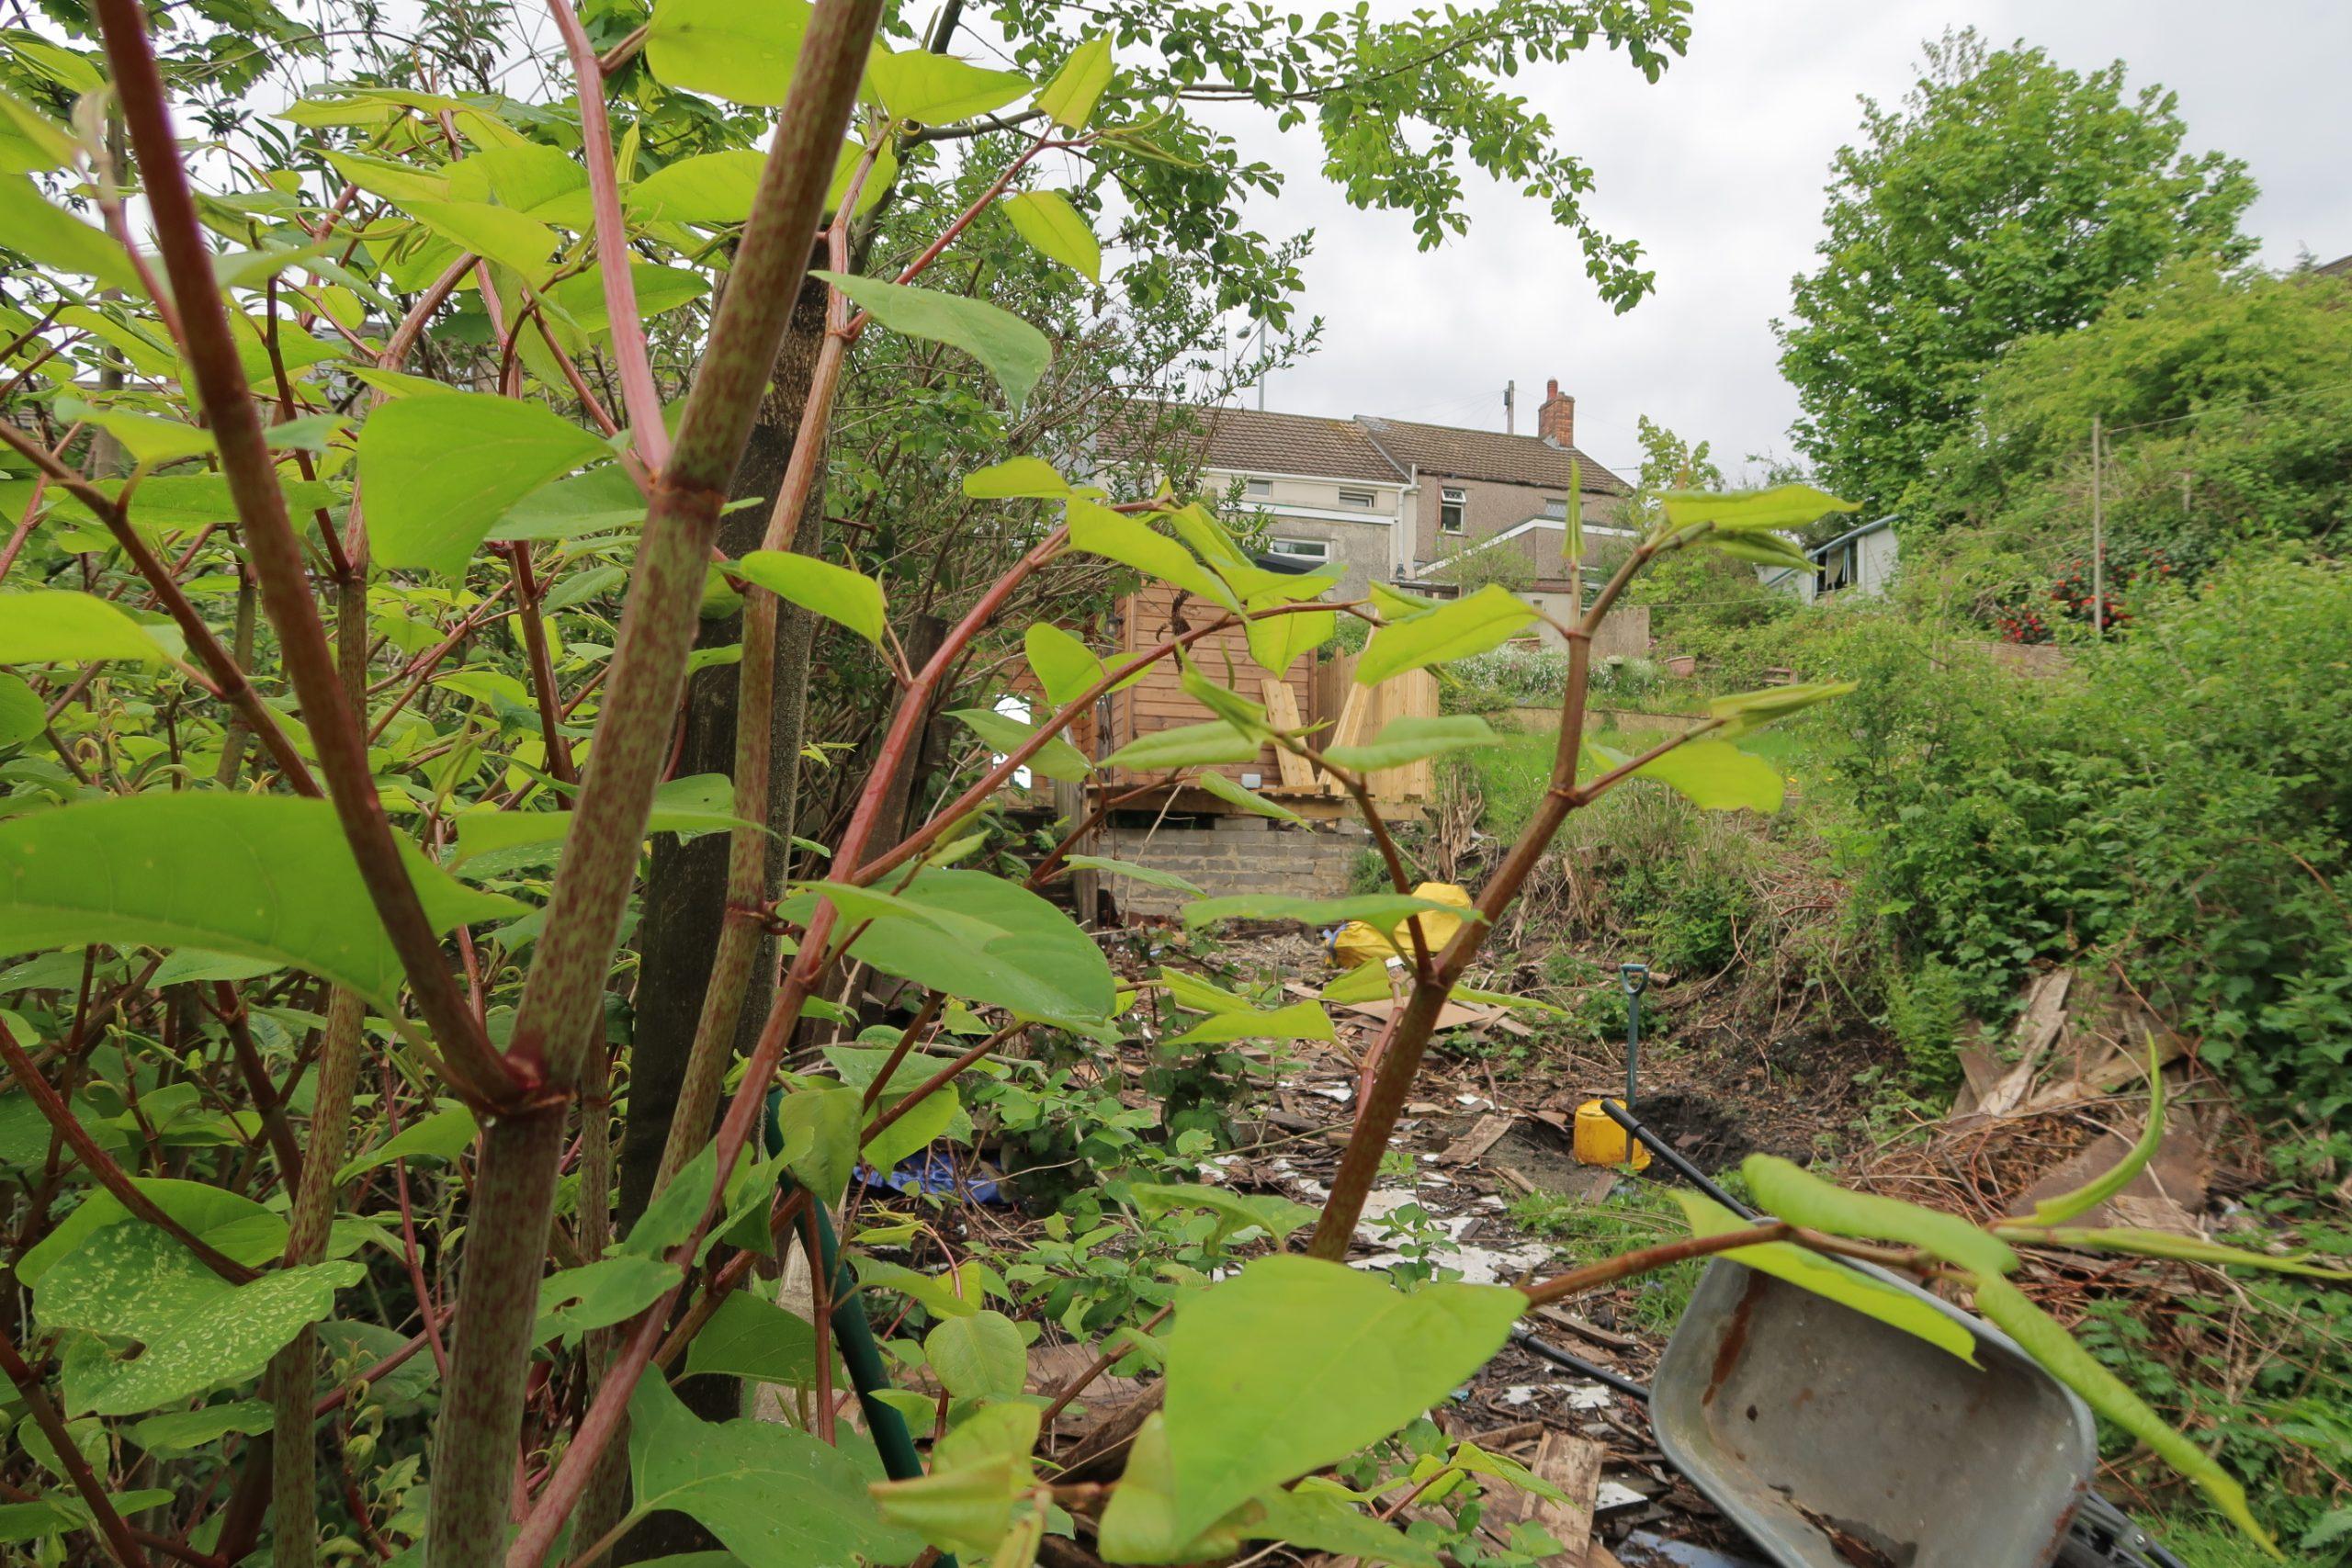 Japanese knotweed encroaching on a property and endangering its value